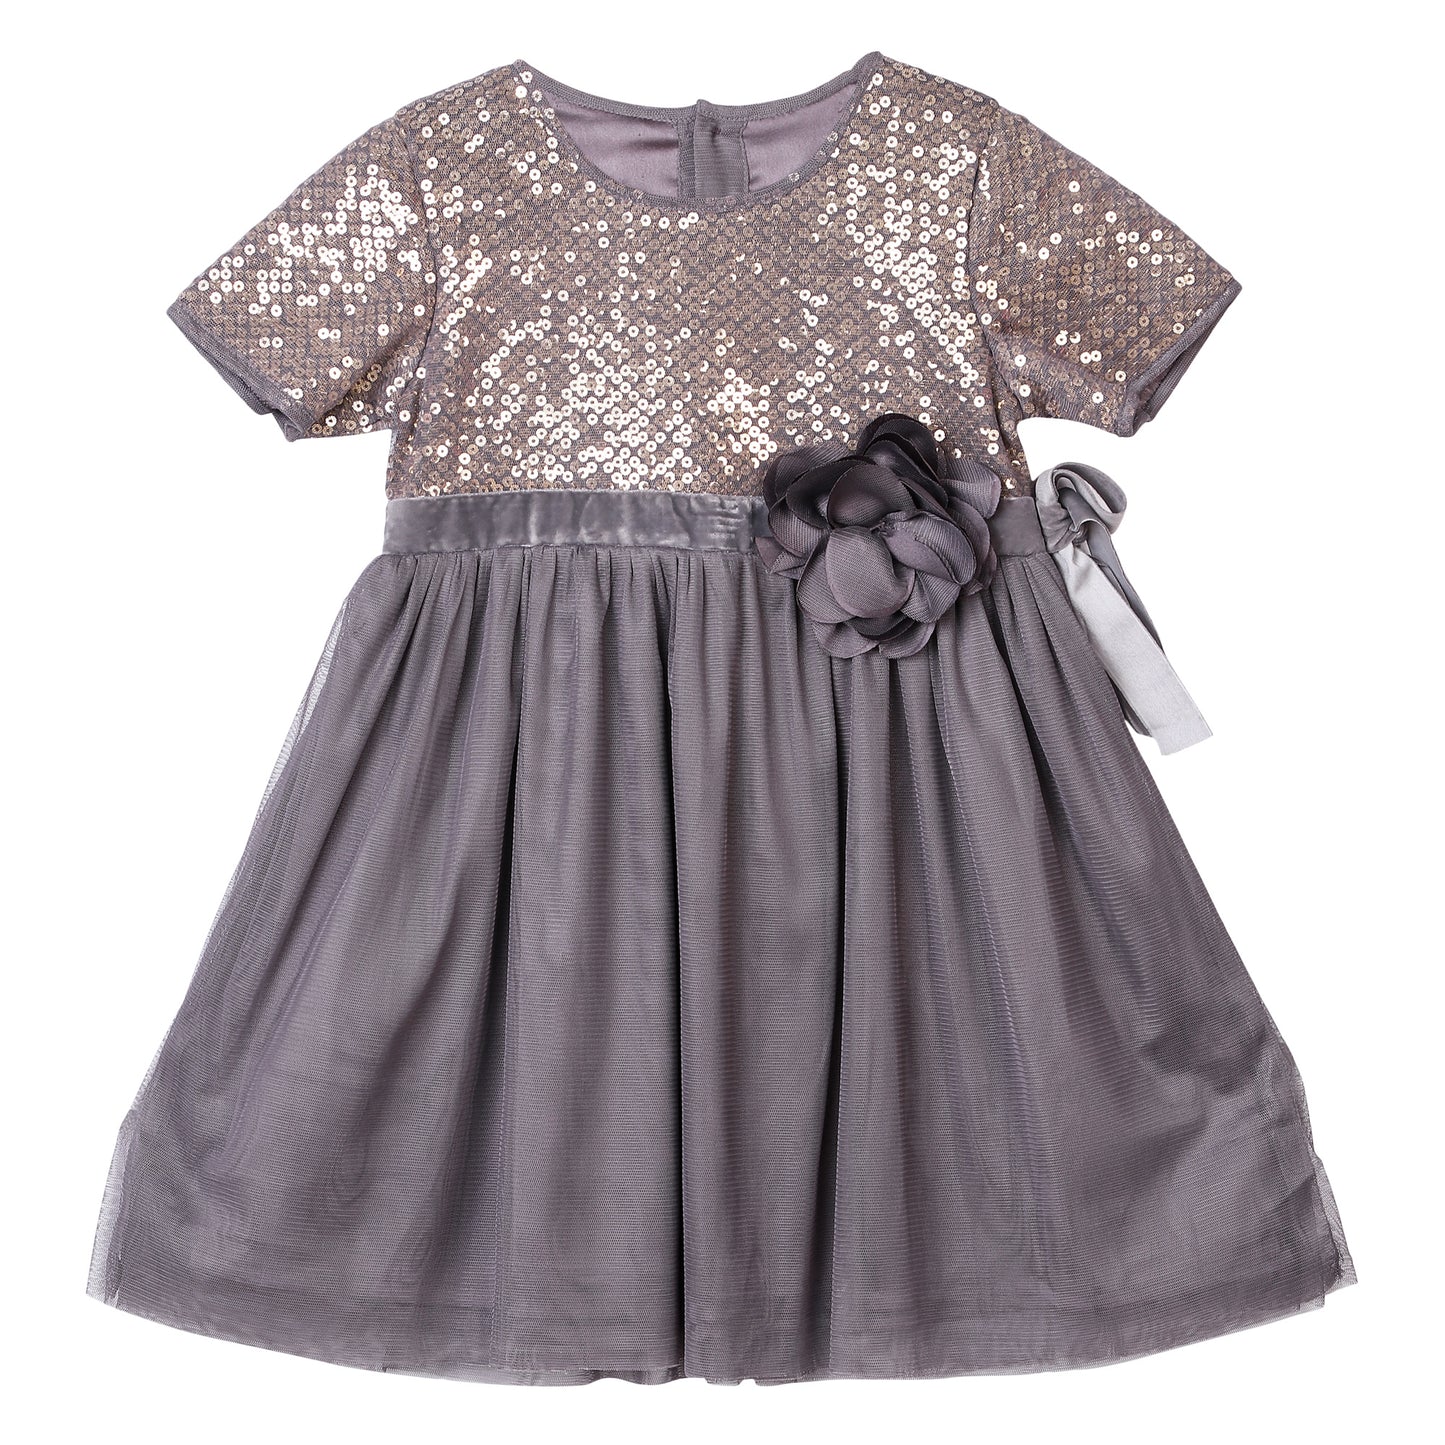 GREY PARTY SEQUIN NET DRESS WITH FLOWER BOW